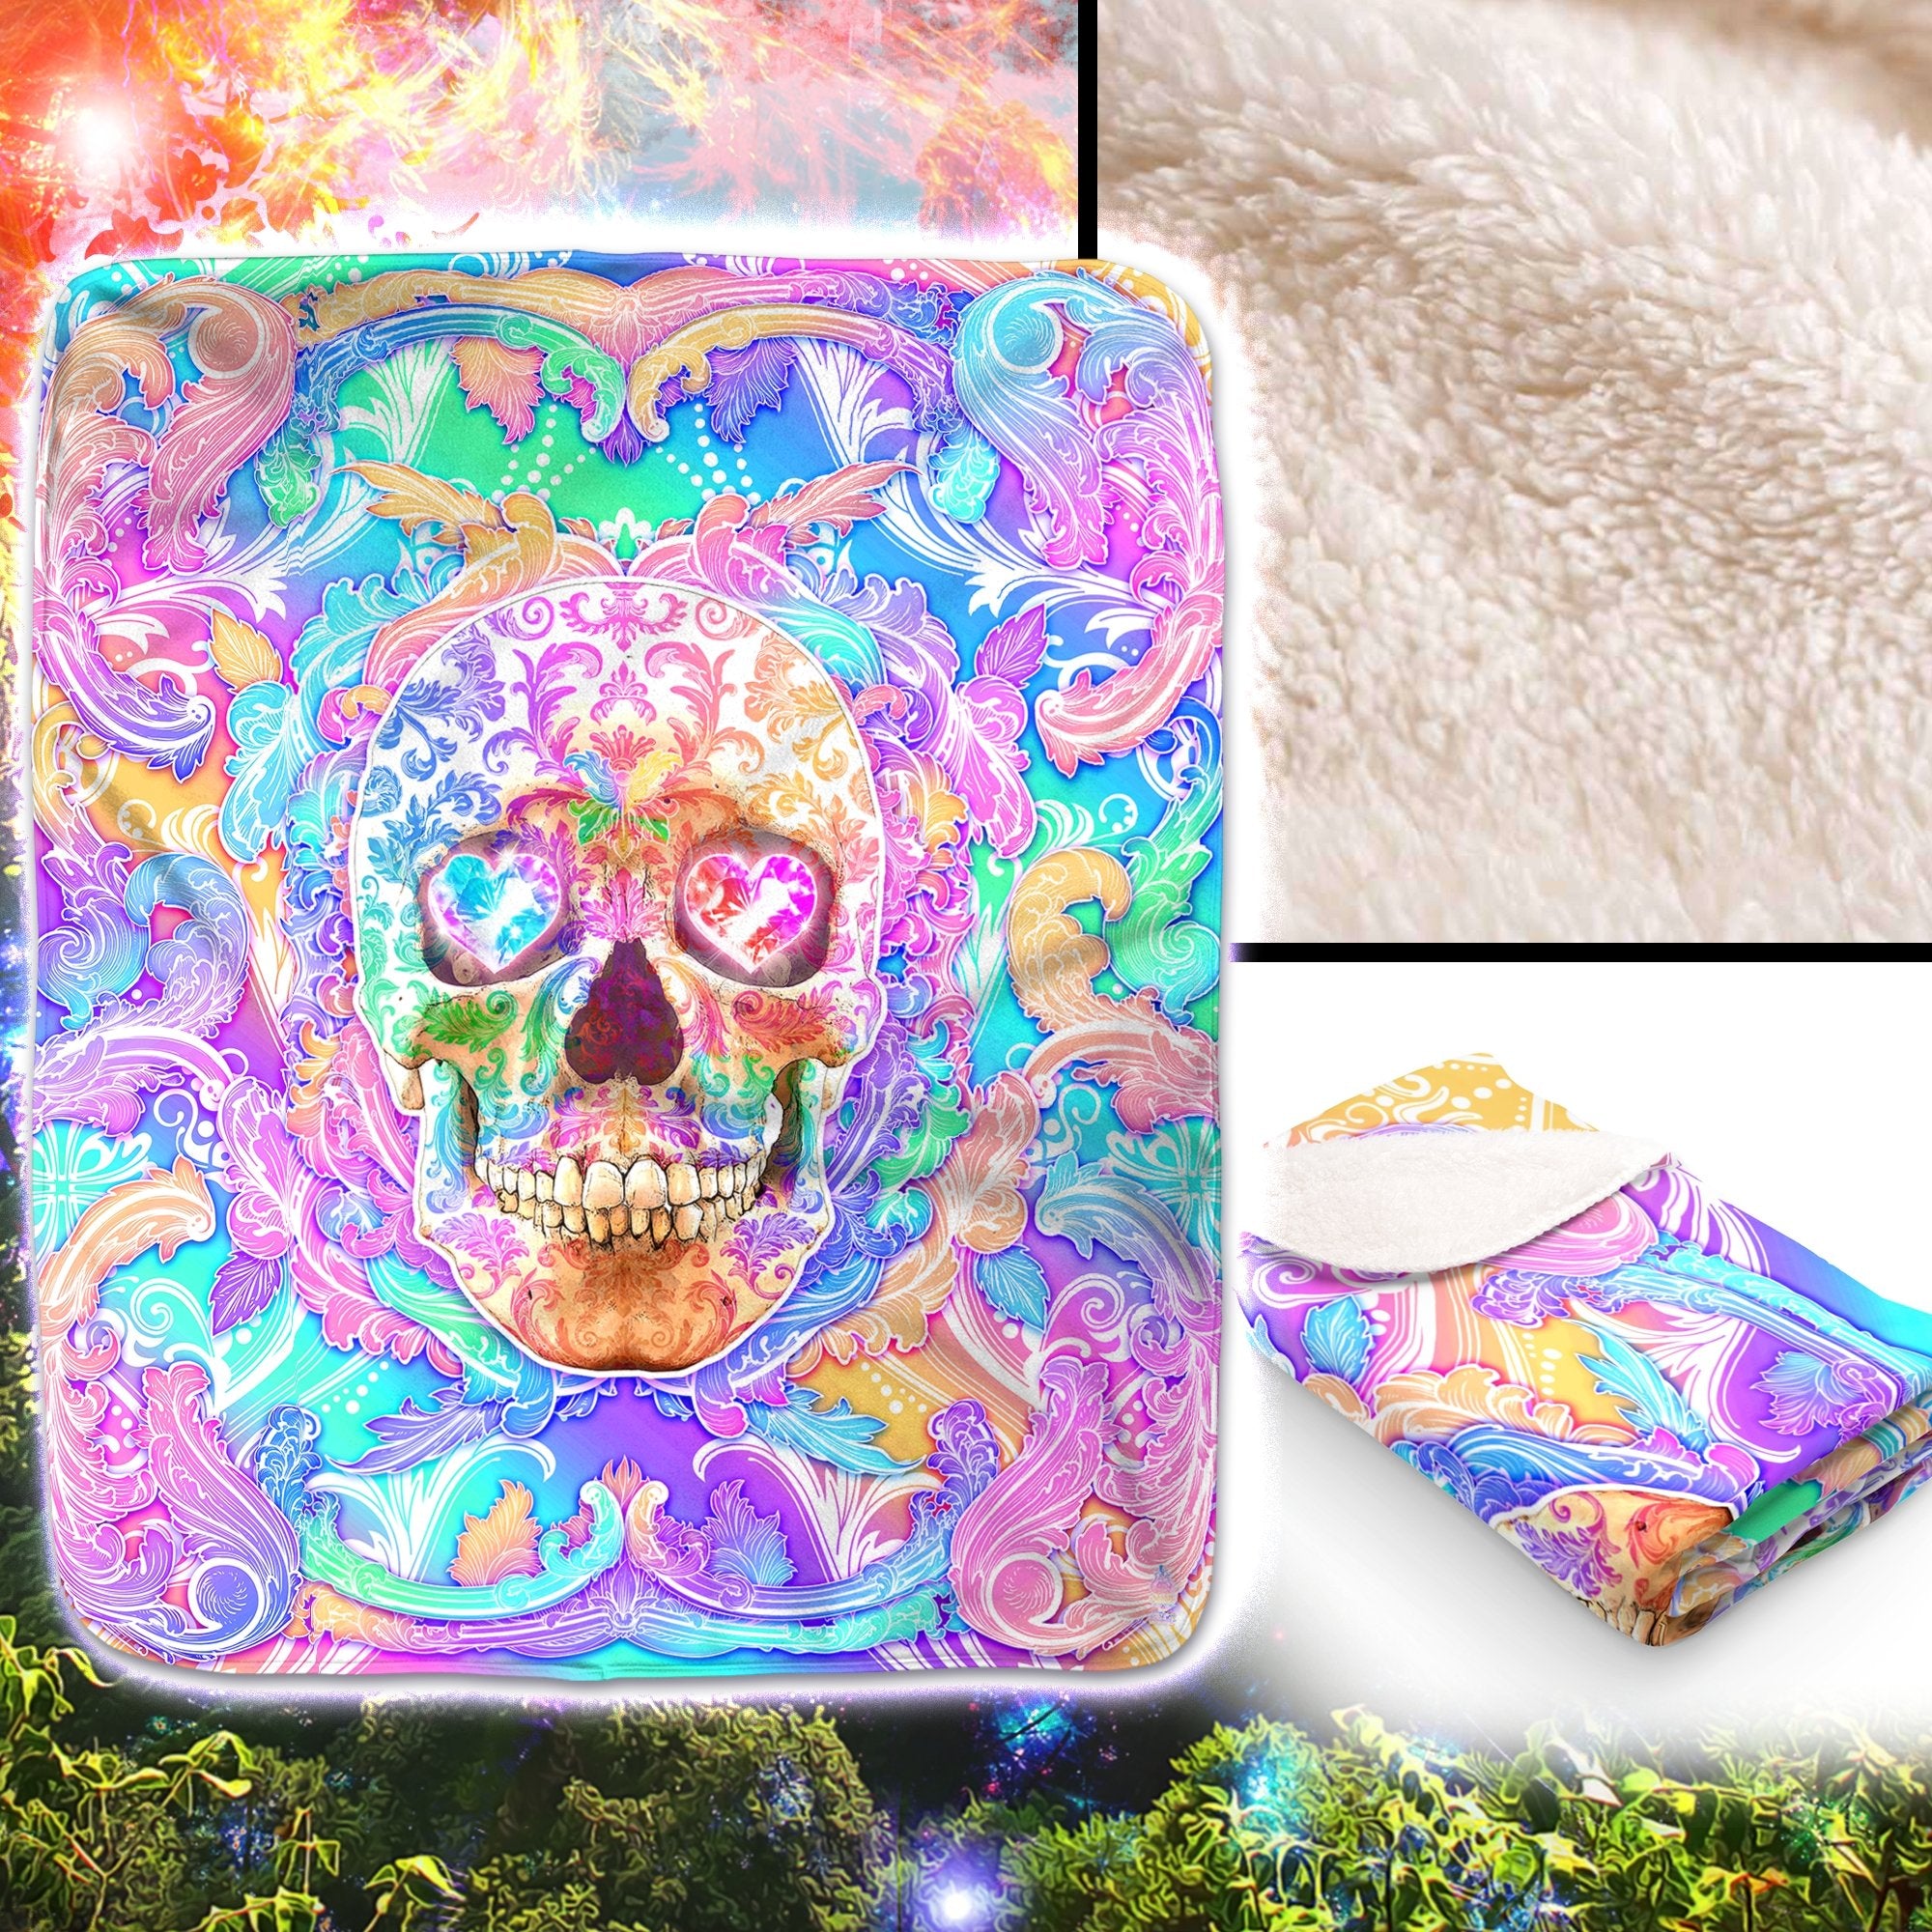 Psychedelic Throw Fleece Blanket, Holographic and Aesthetic Home Decor, Eclectic and Funky Gift - Pastel Skull - Abysm Internal